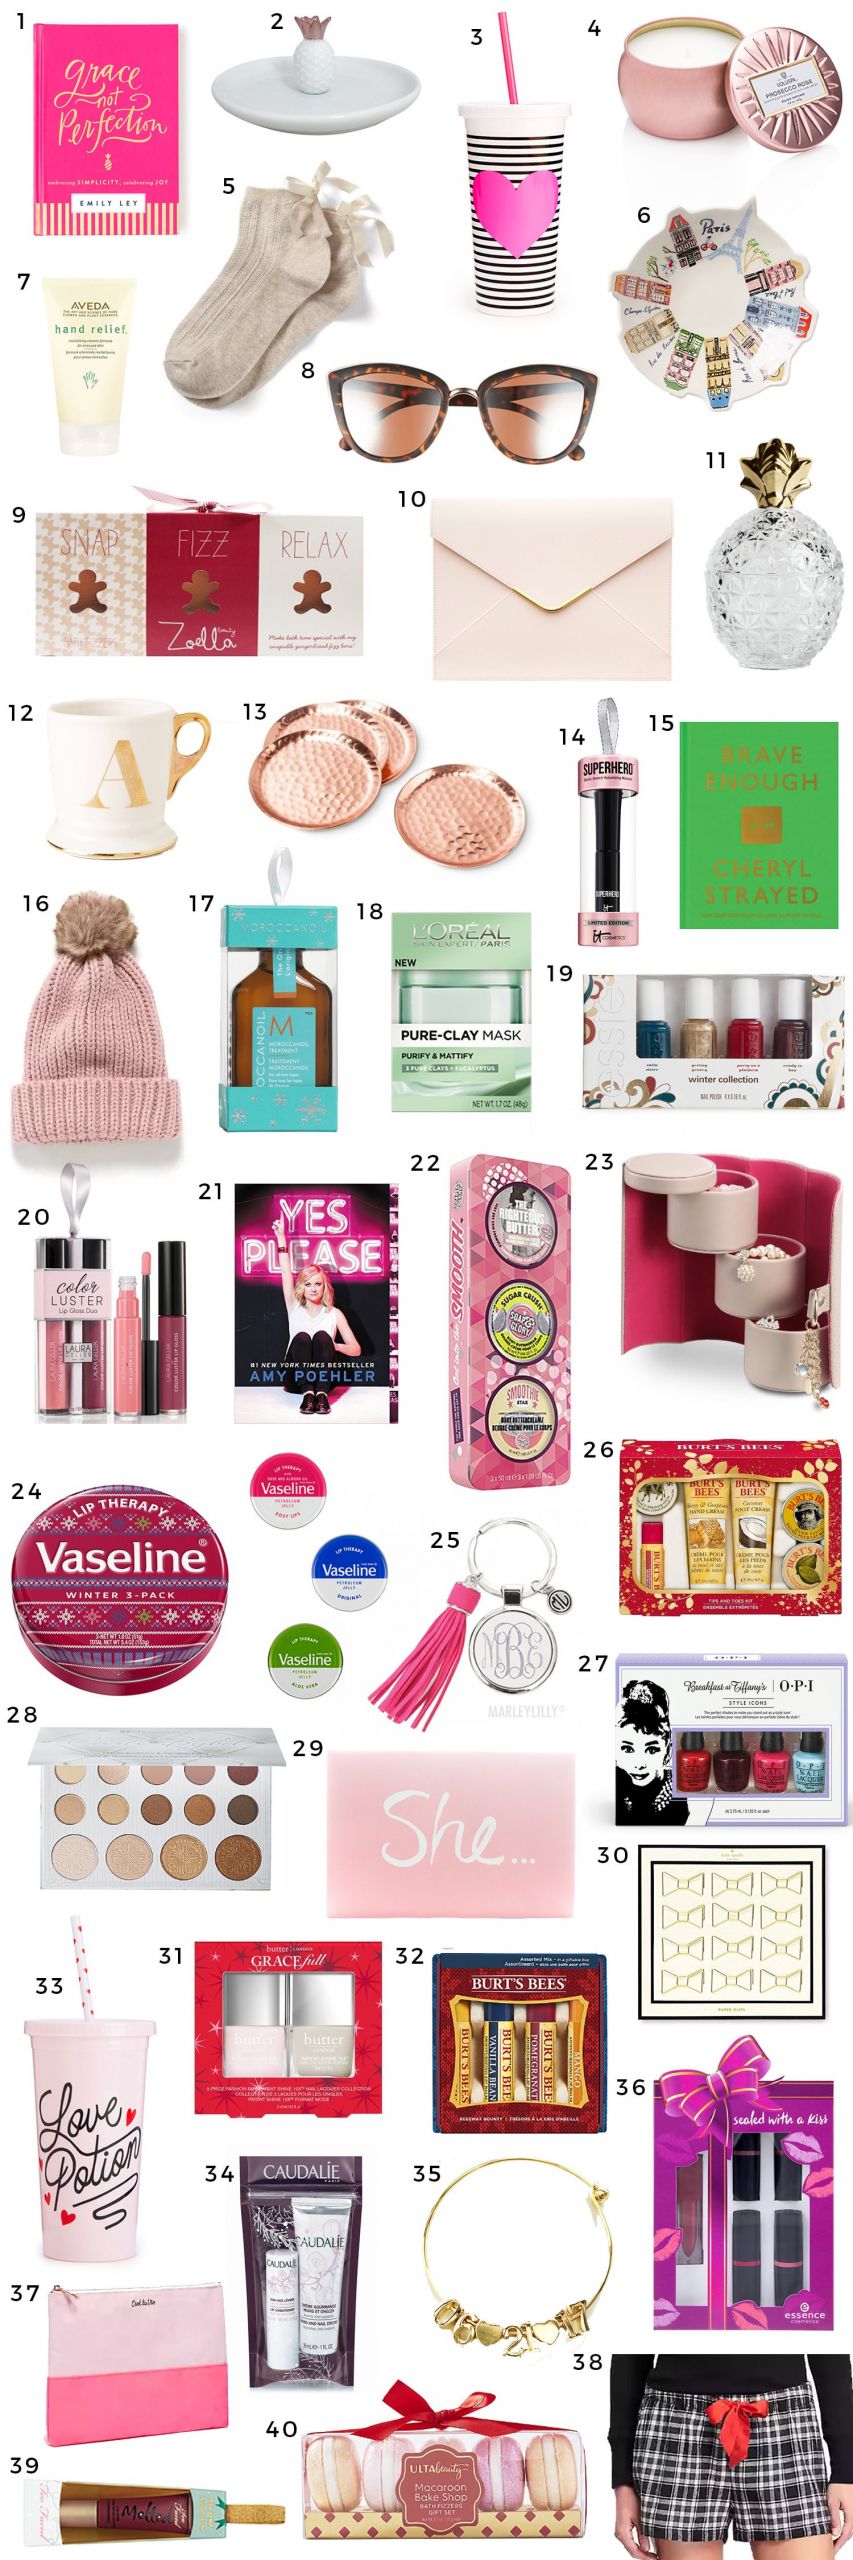 Great Christmas Gifts For Women
 The Best Christmas Gift Ideas for Women Under $15